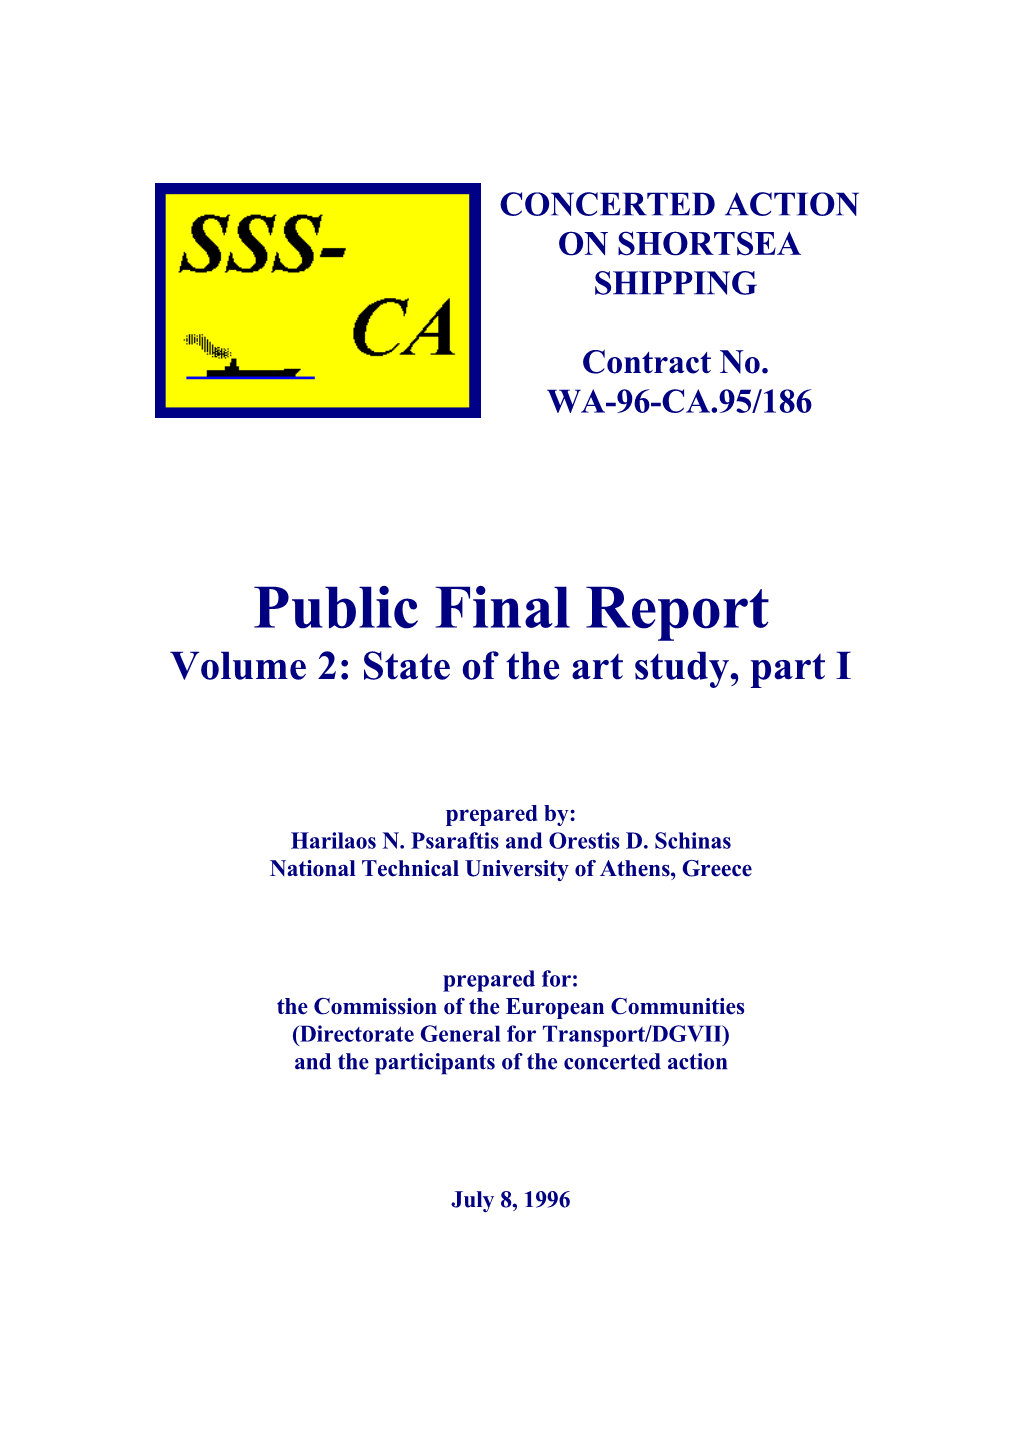 Concerted Action on Shortsea Shipping State of the Art Study Part I